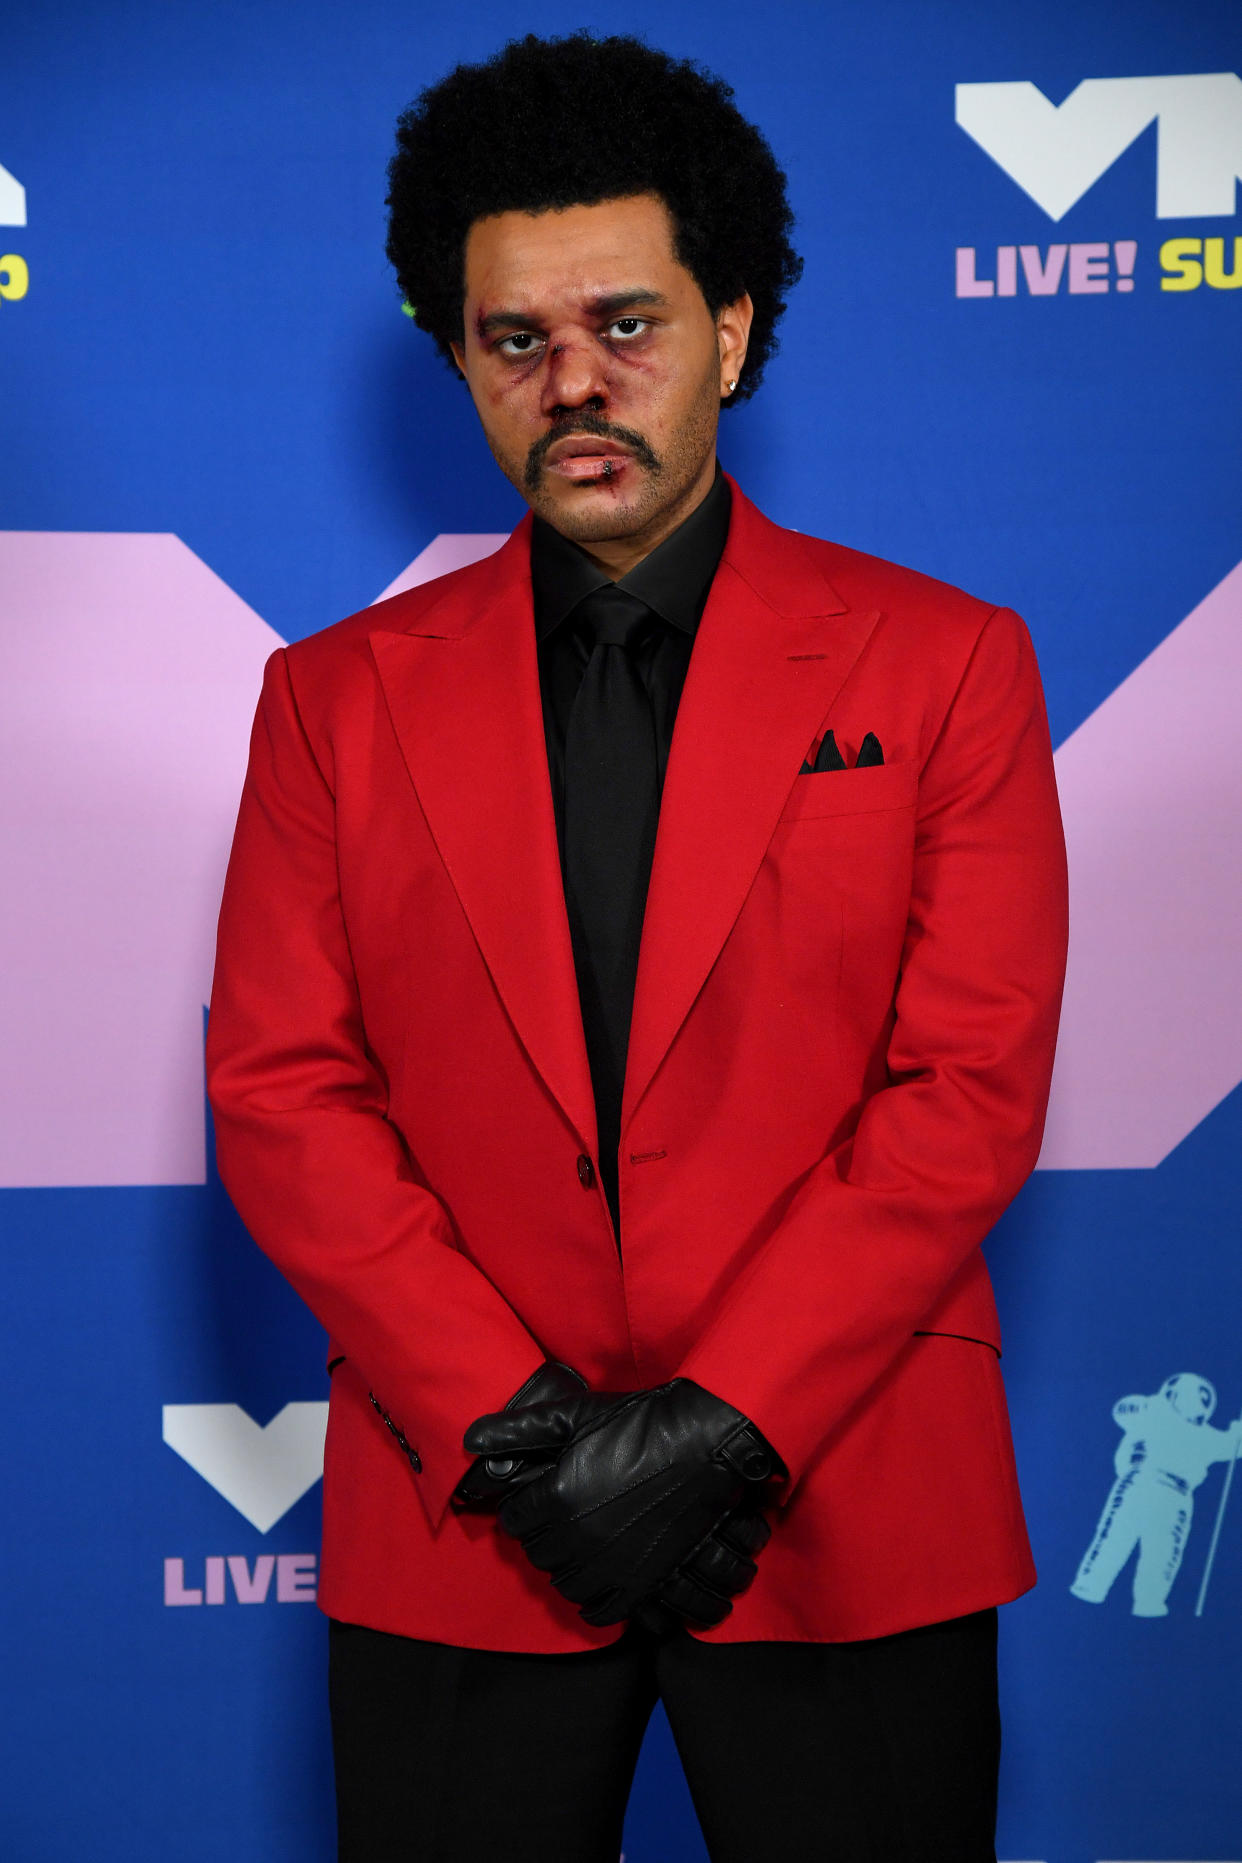 The Weeknd poses with bloodied face at the 2020 MTV Video Music Awards